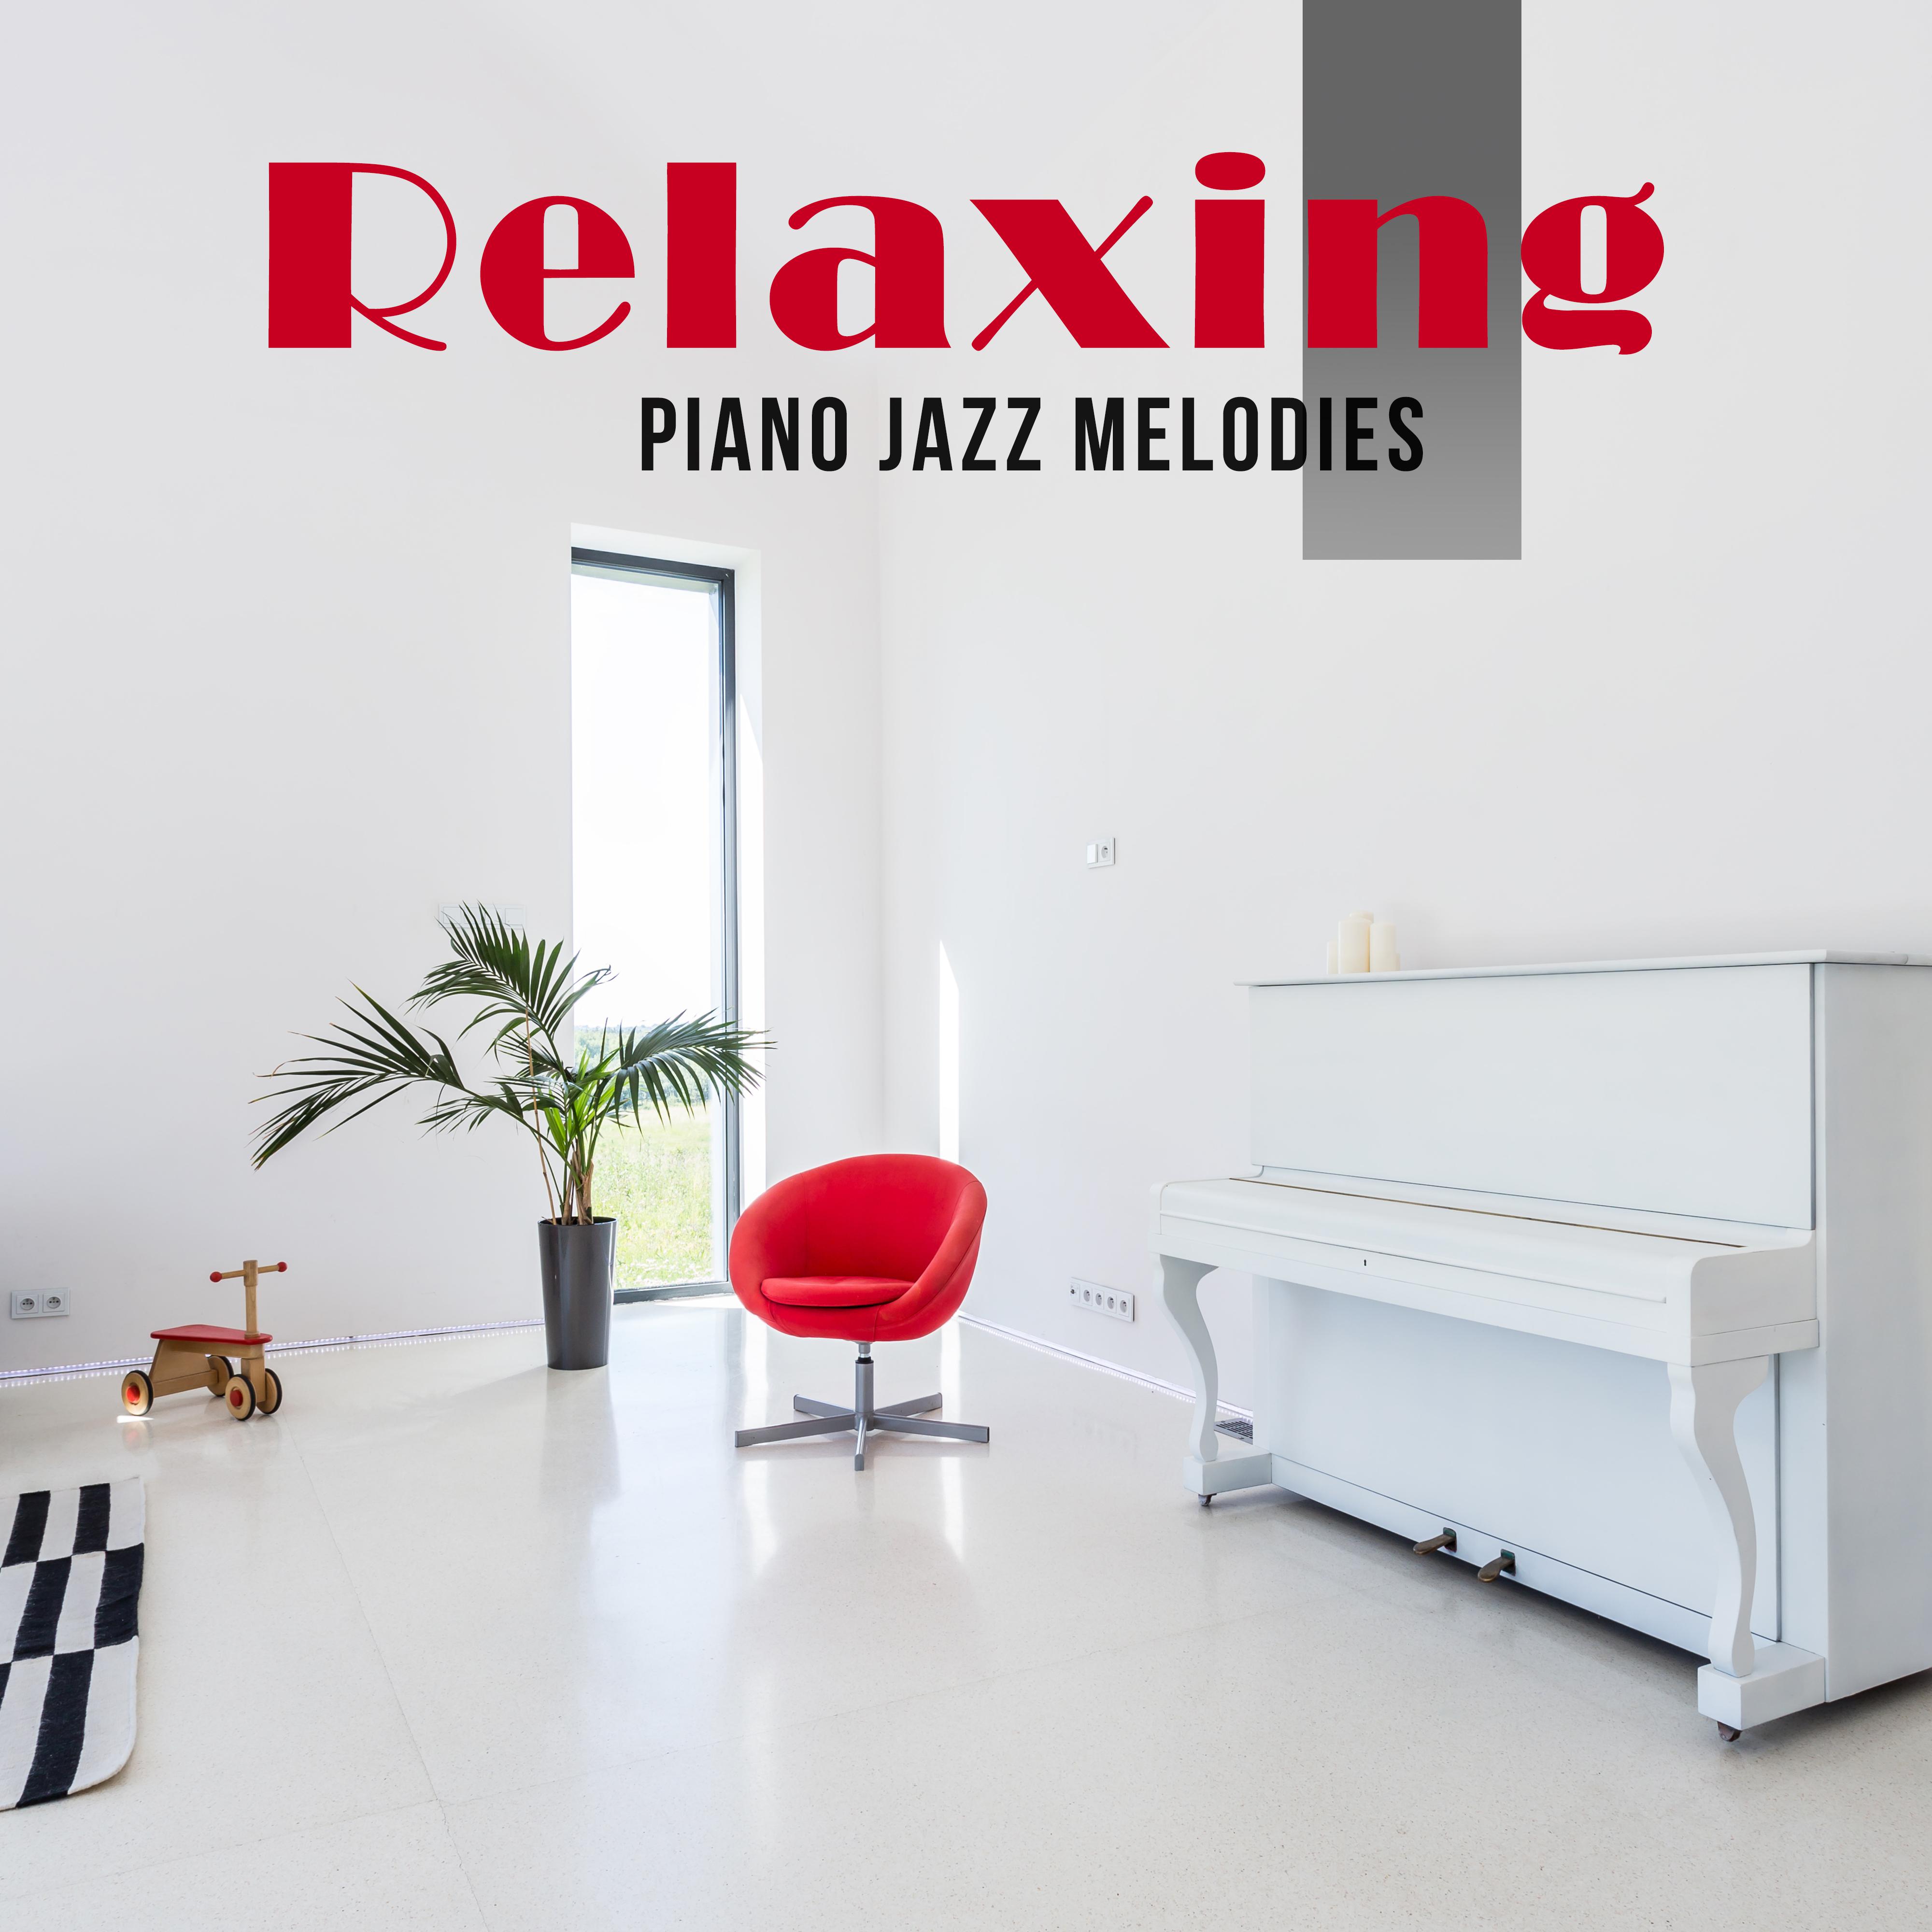 Relaxing Piano Jazz Melodies